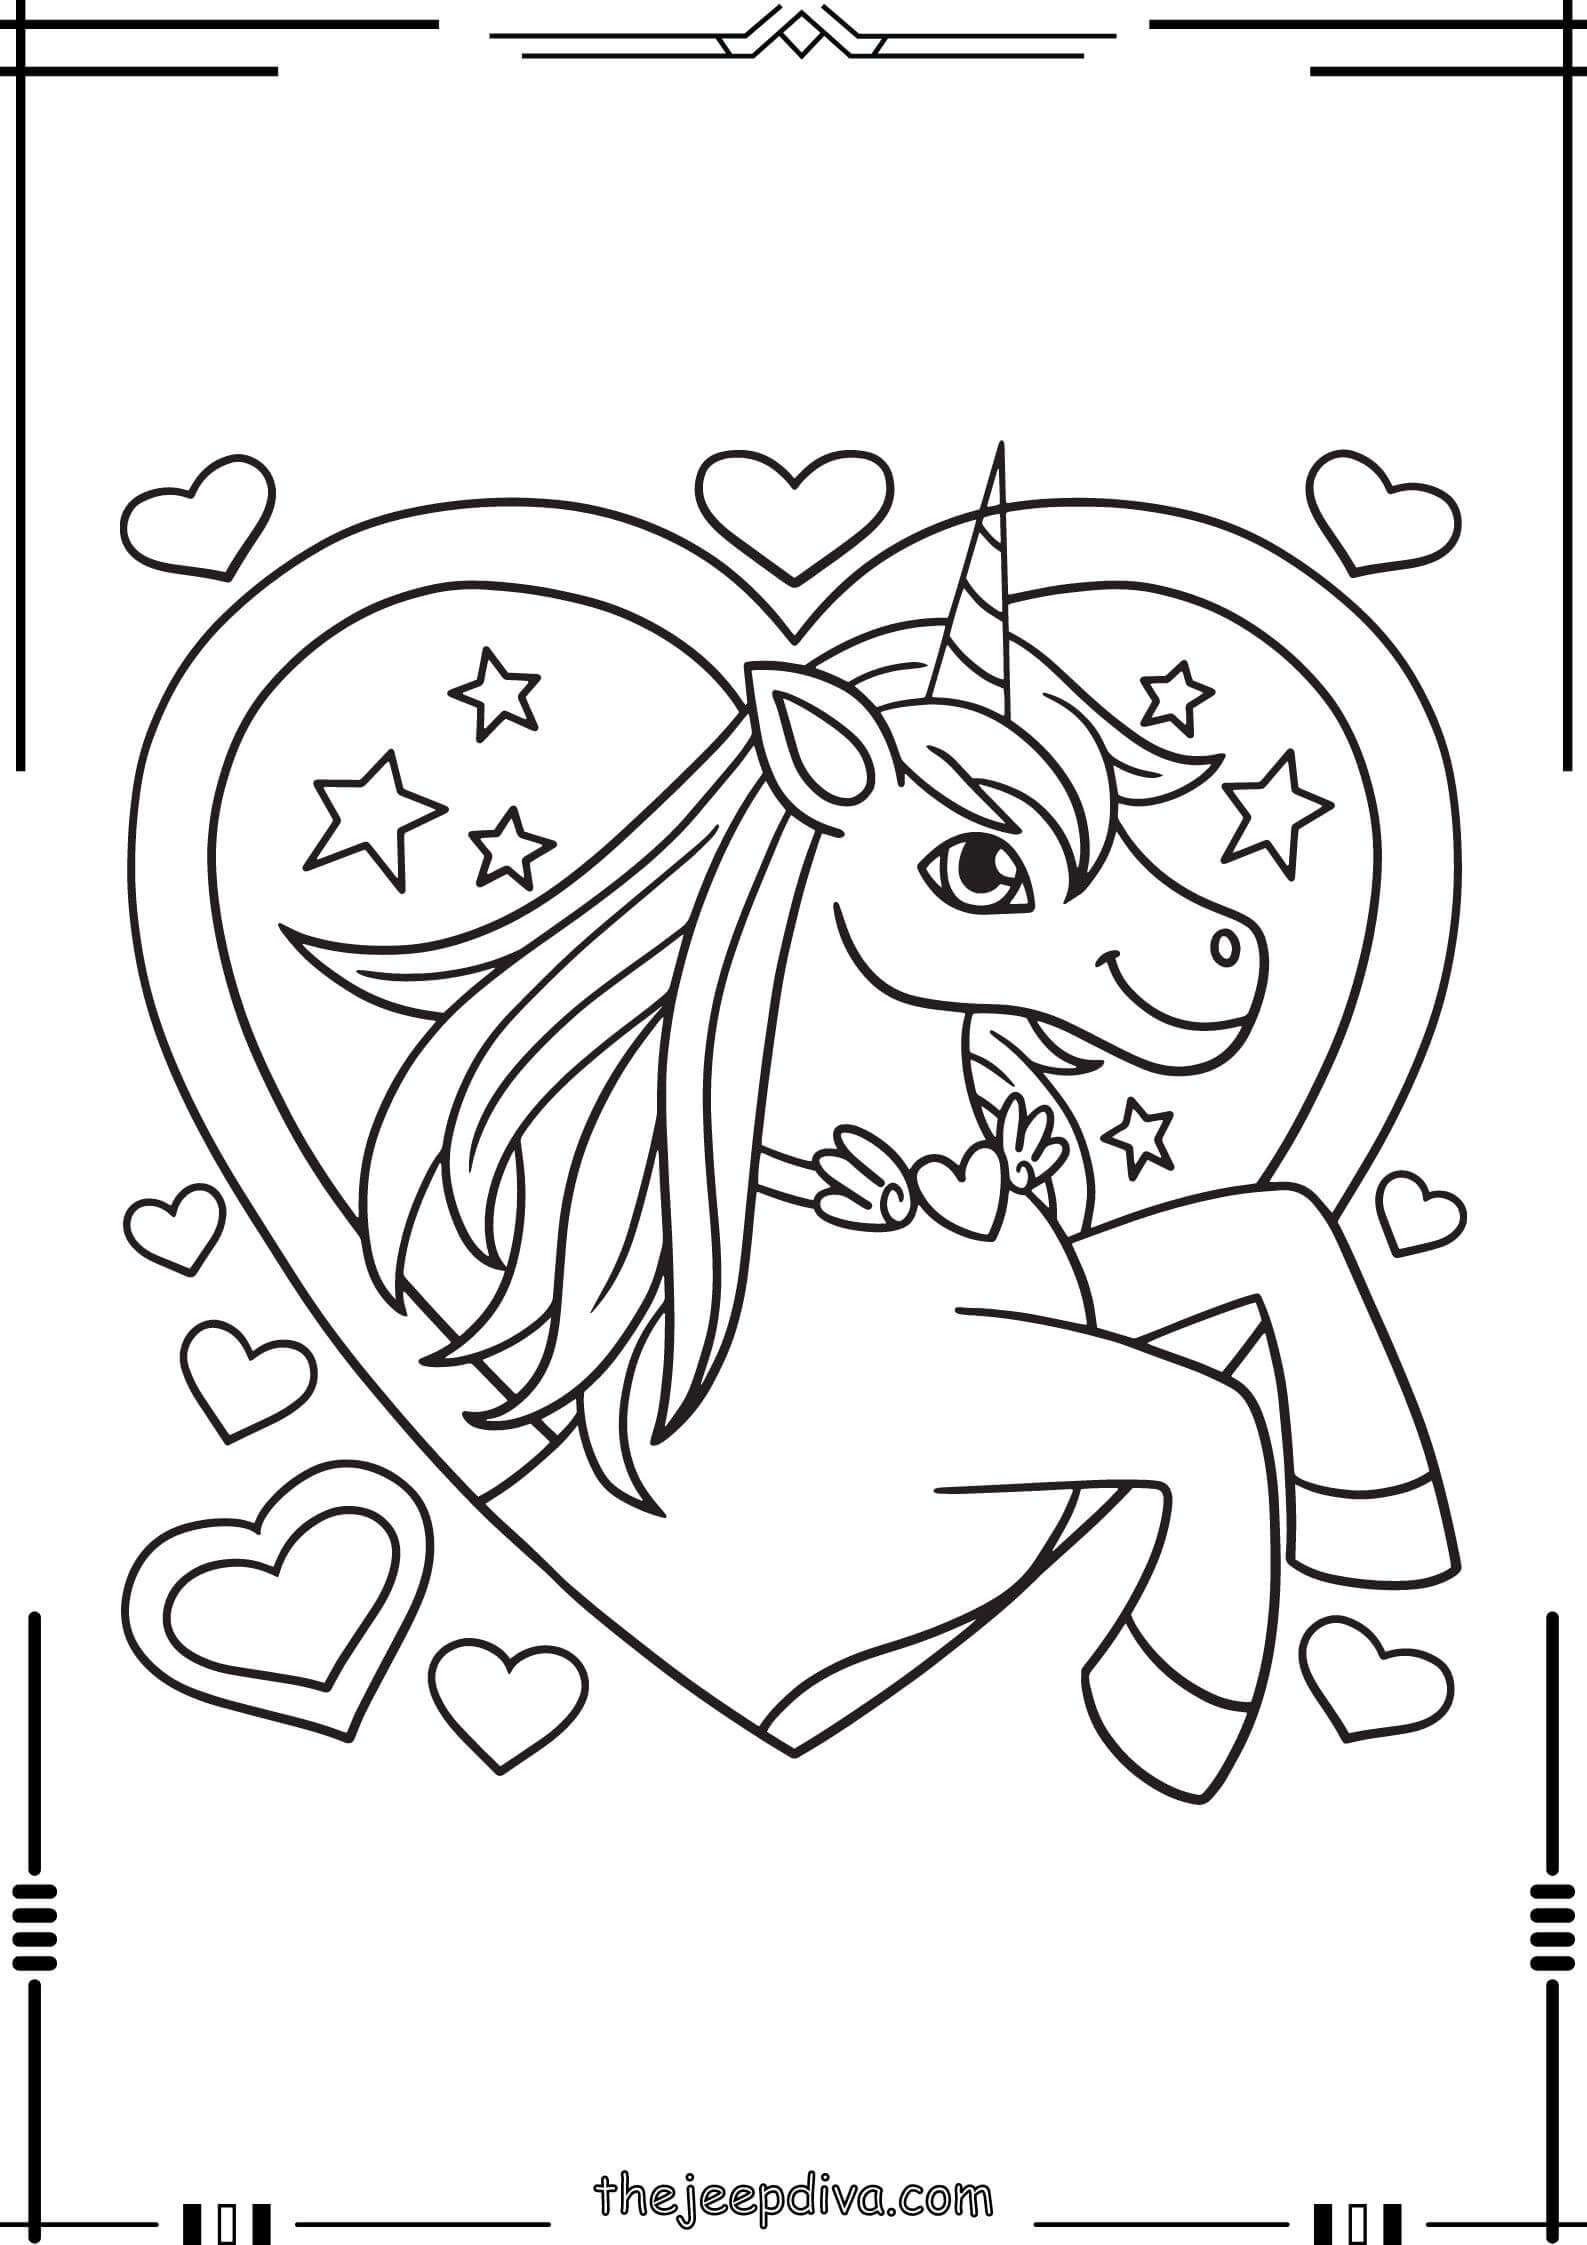 unicorn-coloring-page-easy-19